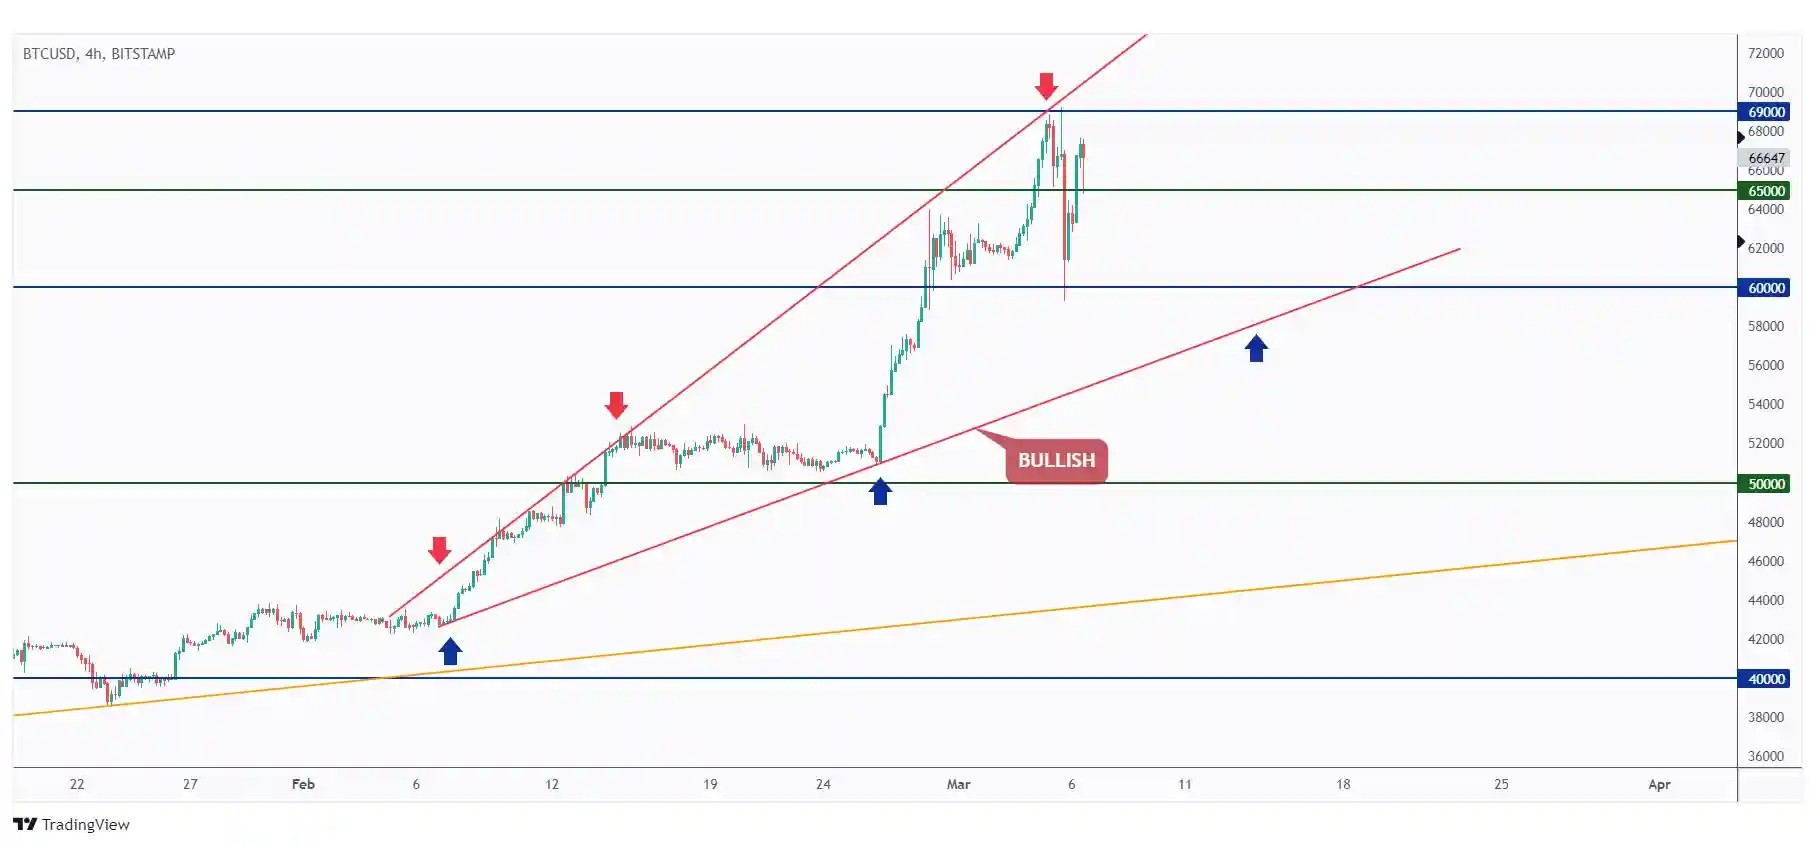 BTC 4h chart showing the overall bullish trend within the rising wedge pattern.